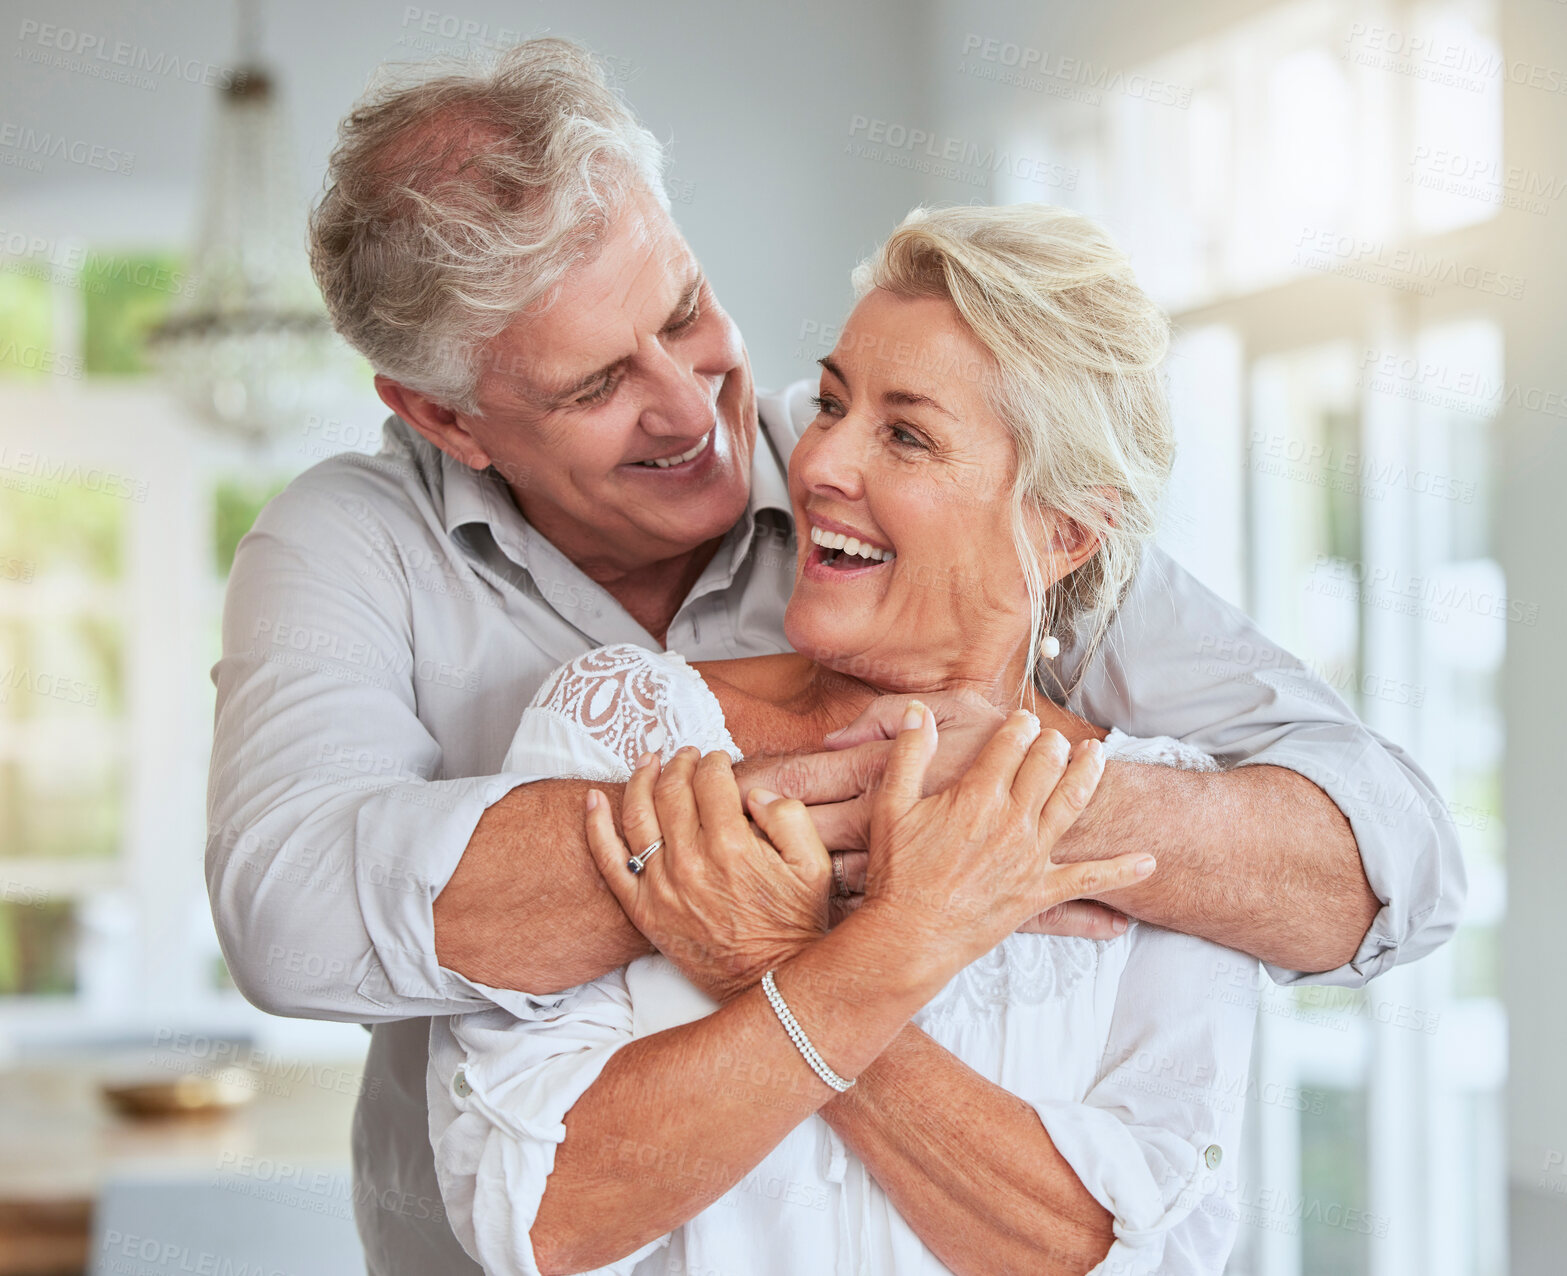 Buy stock photo Senior couple, happy and hug for love, support and care in relationship at home embrace, bond or smile. Romance, married or retired old elderly man and woman in retirement celebrate marriage together